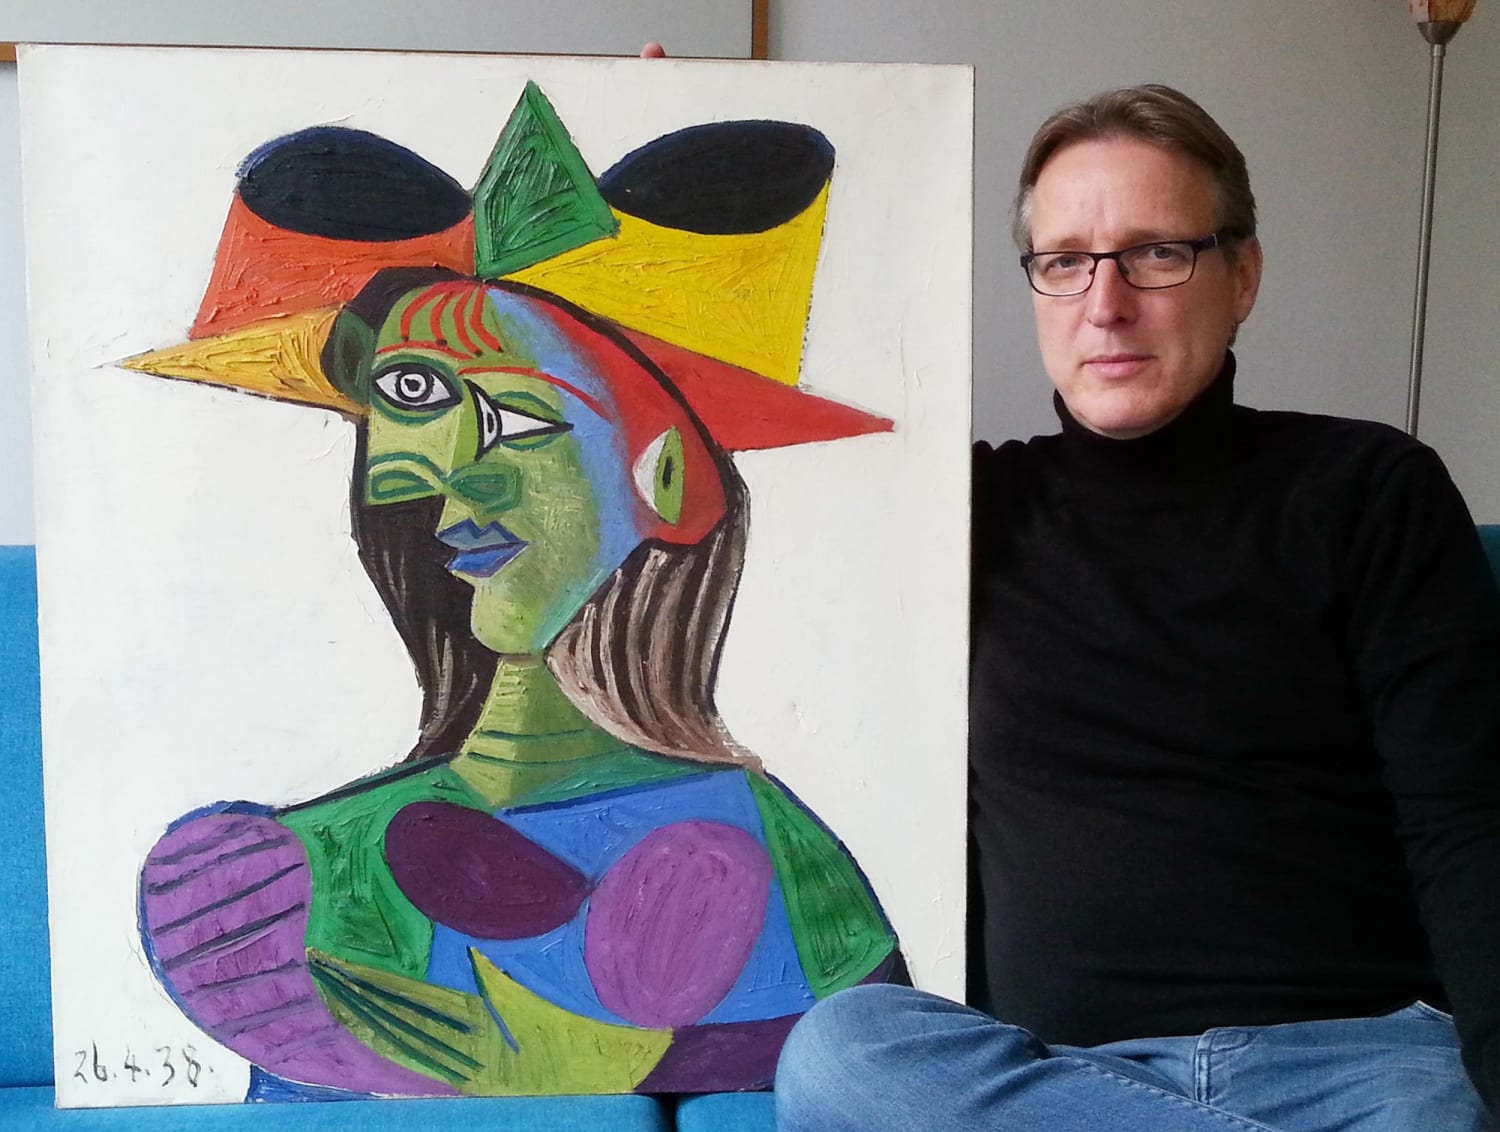 Picasso painting stolen 10 years ago found by